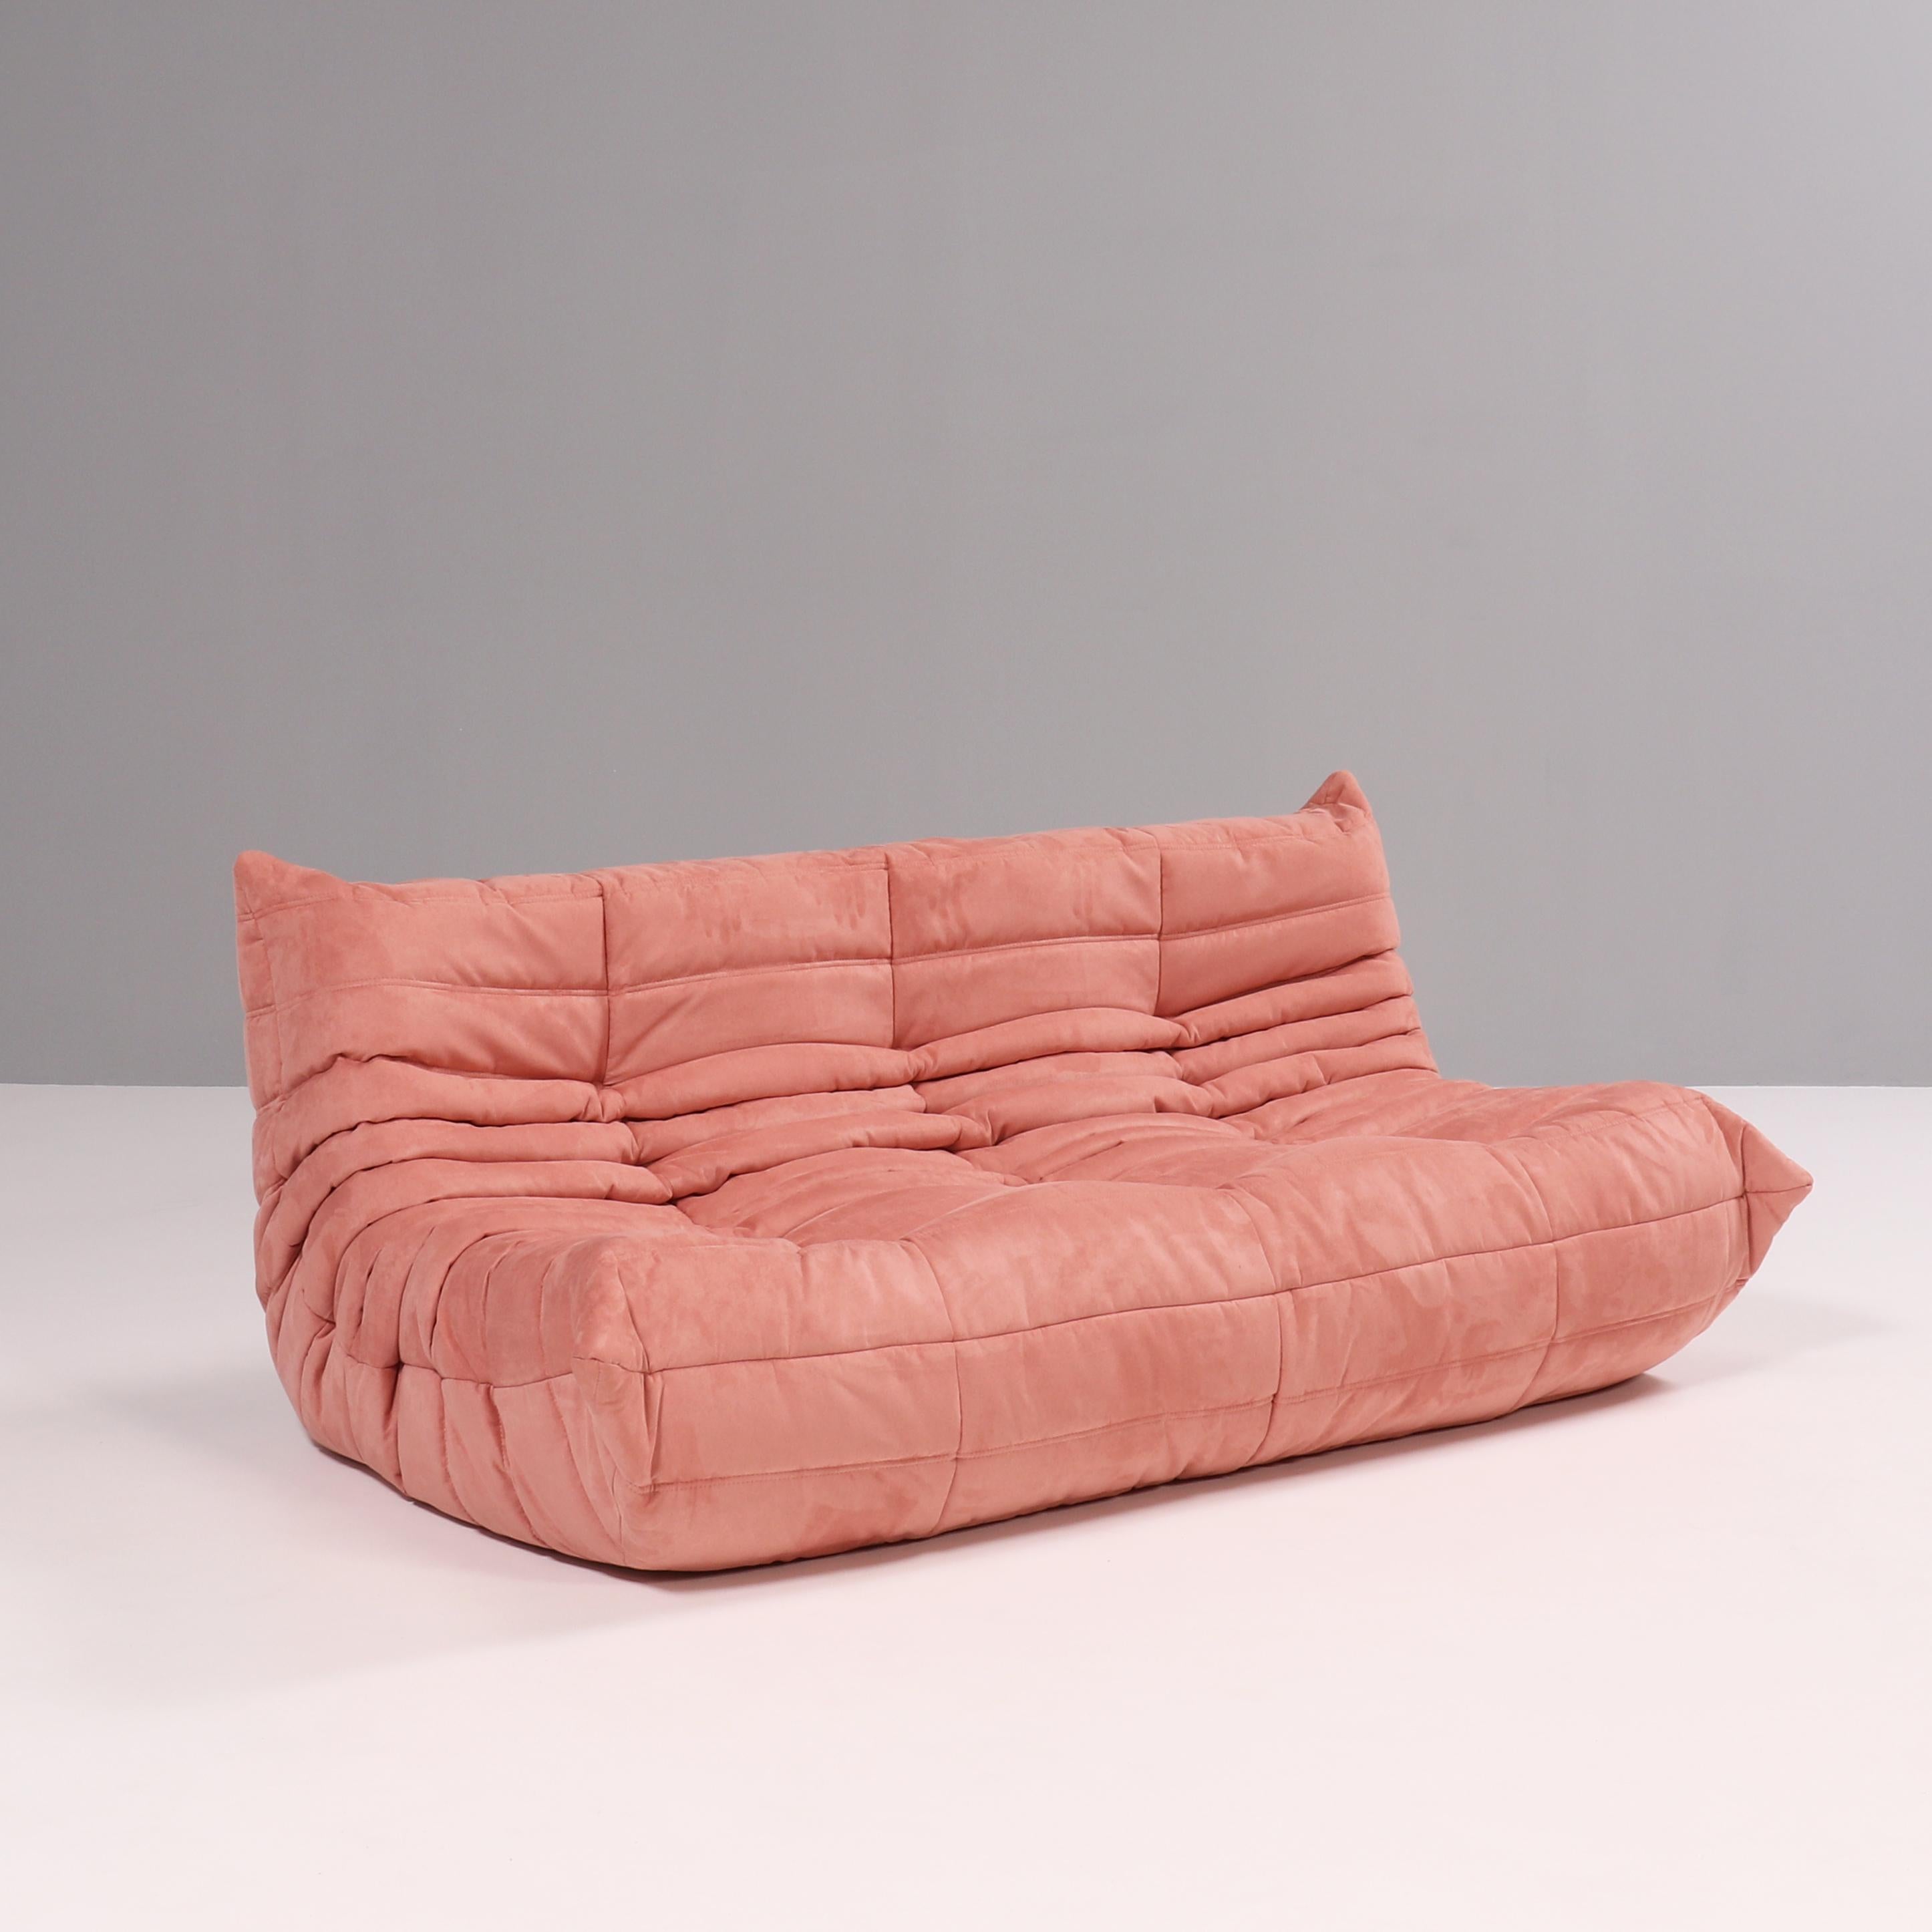 Fabric Ligne Roset by Michel Ducaroy Togo Pink Modular Sofa and Footstool, Set of 5